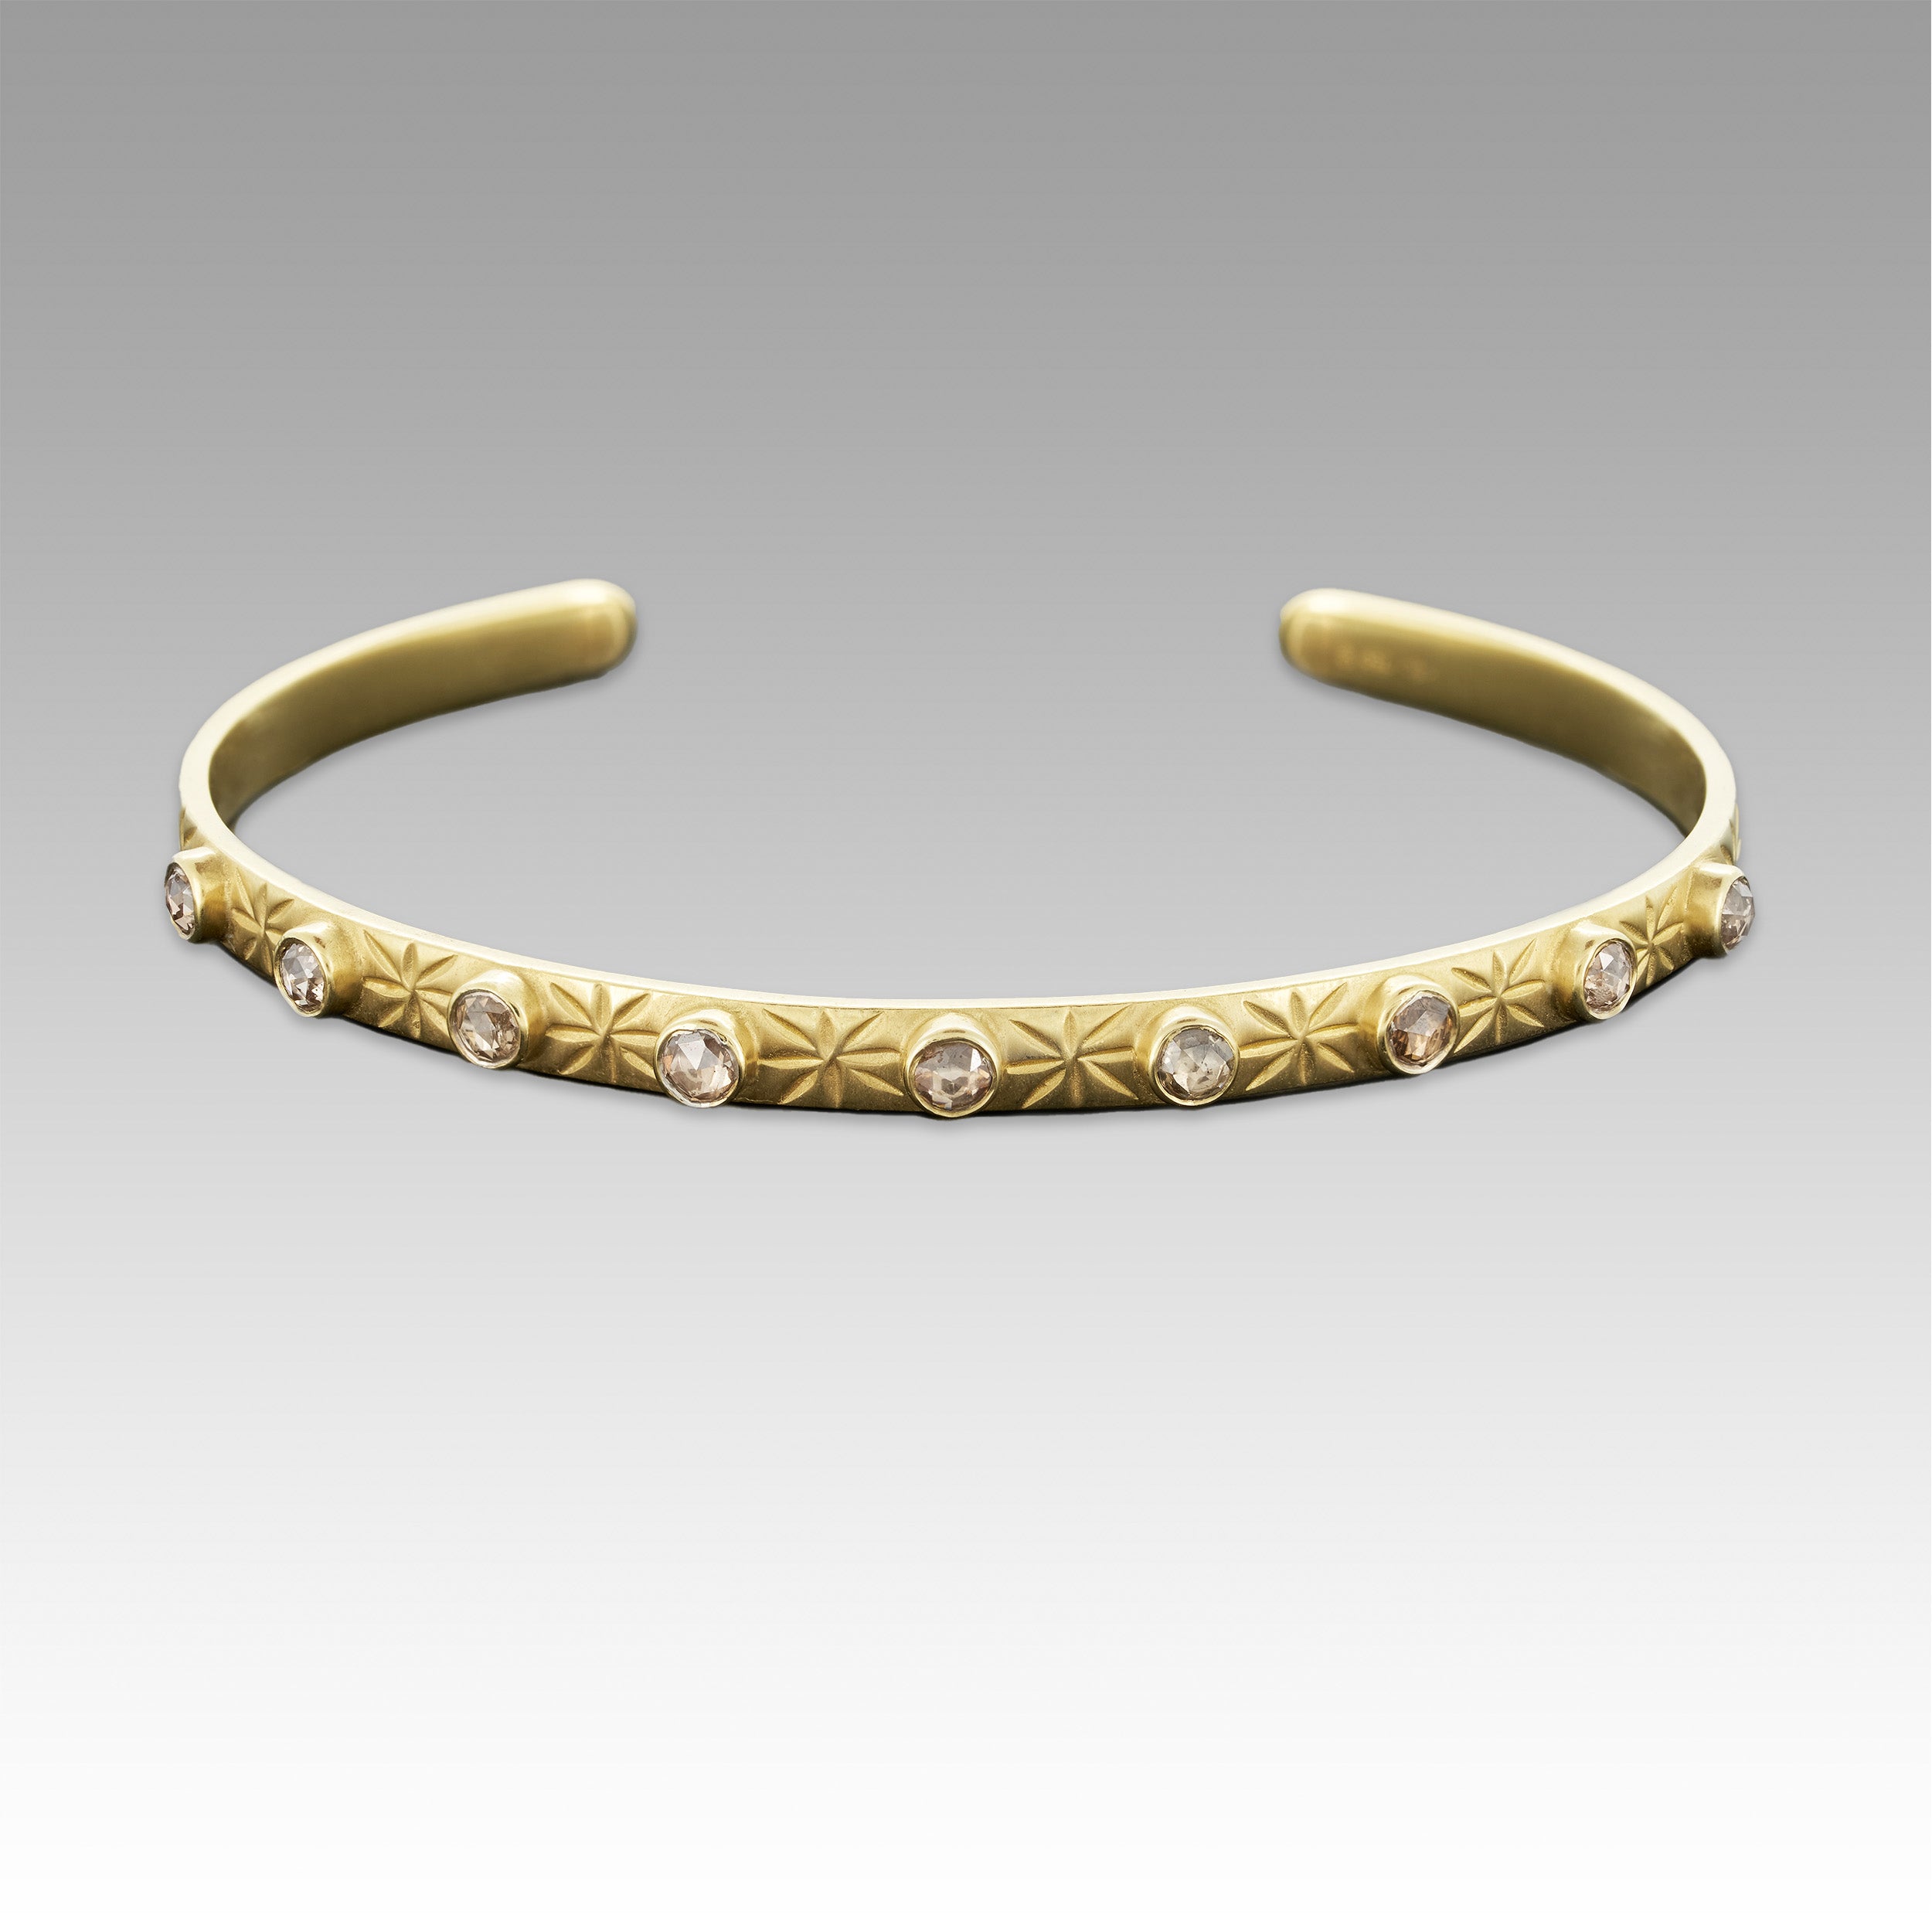 Hetre Alresford Hampshire Boutique Jewellery Sophie Theakston Diamond Moon and Back Cuff  